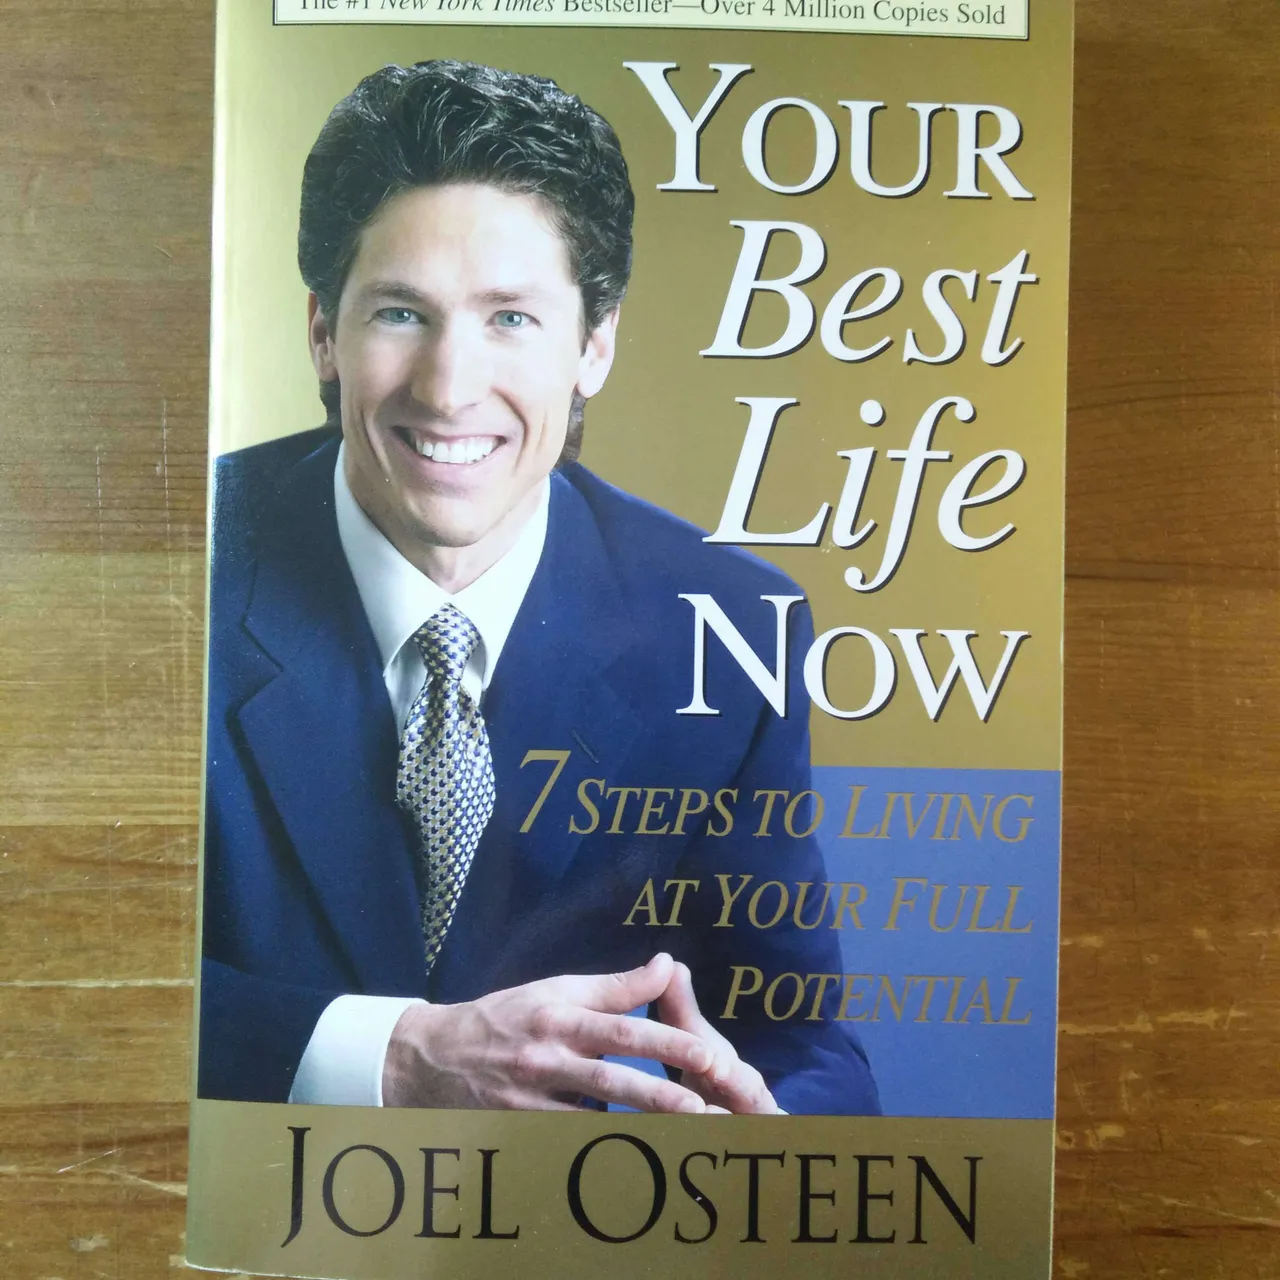 Your Best Life Now by Joel Osteen photo 1